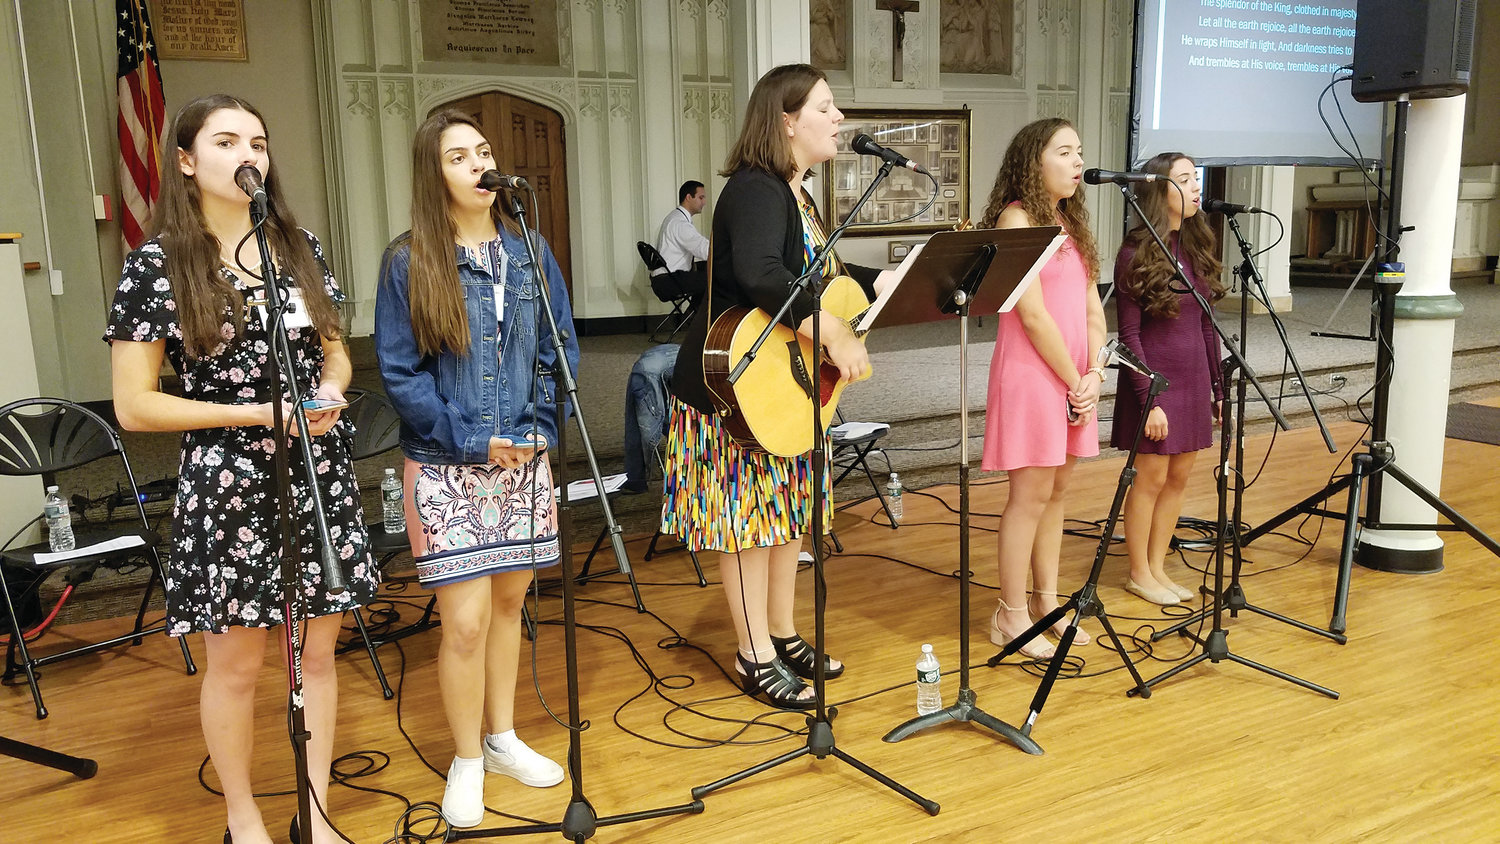 The annual Rhode Island Catholic Women’s Conference, held on Saturday, Sept. 21, at the Cathedral of SS. Peter and Paul, Providence, include keynote speakers, Mass celebrated by Bishop Thomas J. Tobin, many vendors and praise and worship.